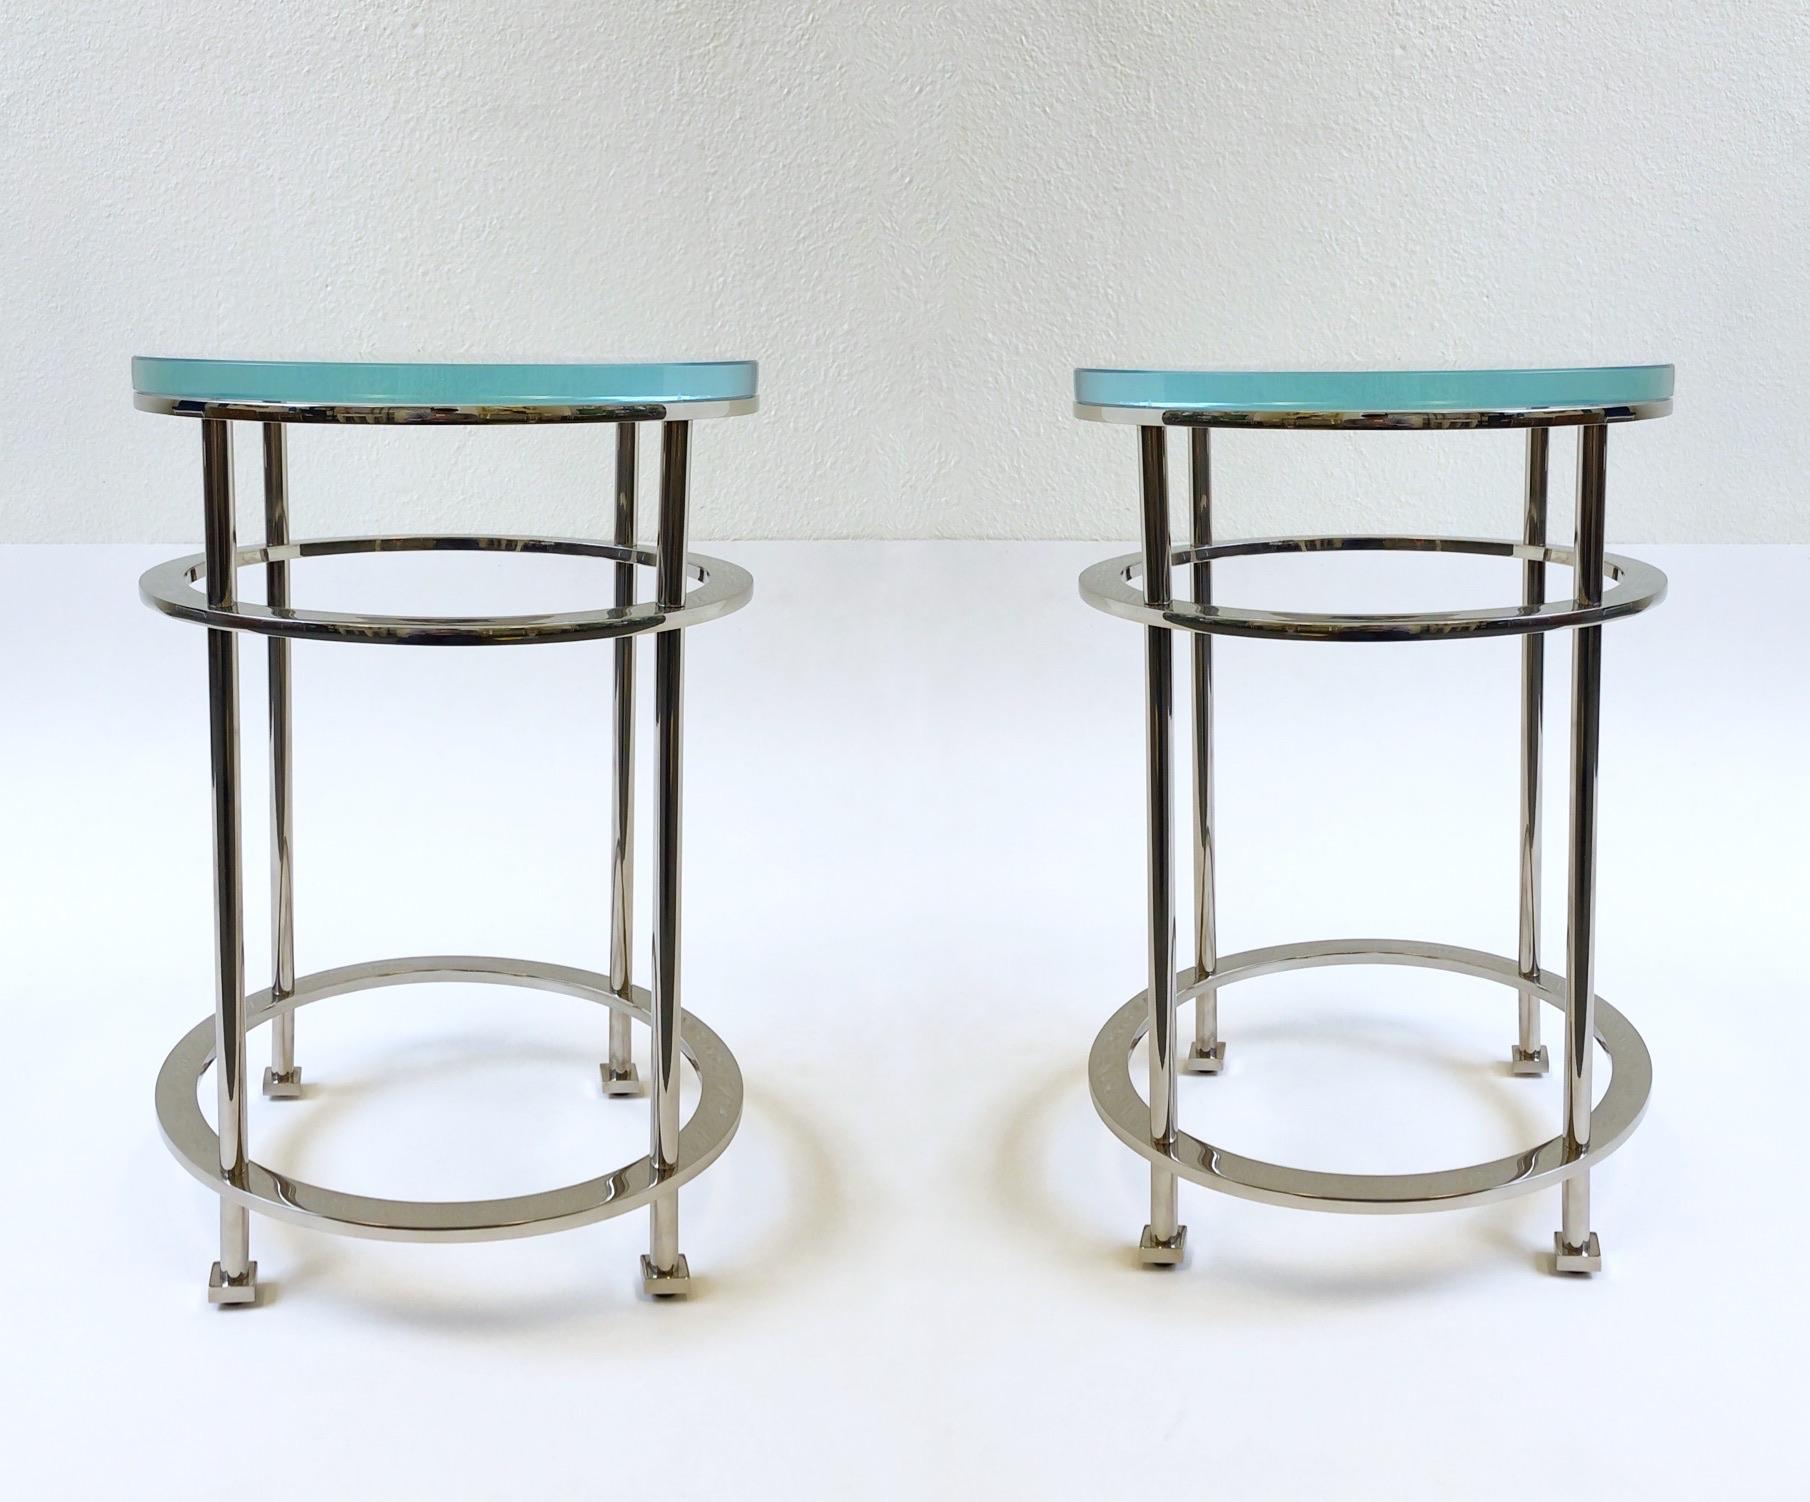 Modern Pair of Nickel and Lucite Side Tables by Jean Michel Wilmotte for Mirak